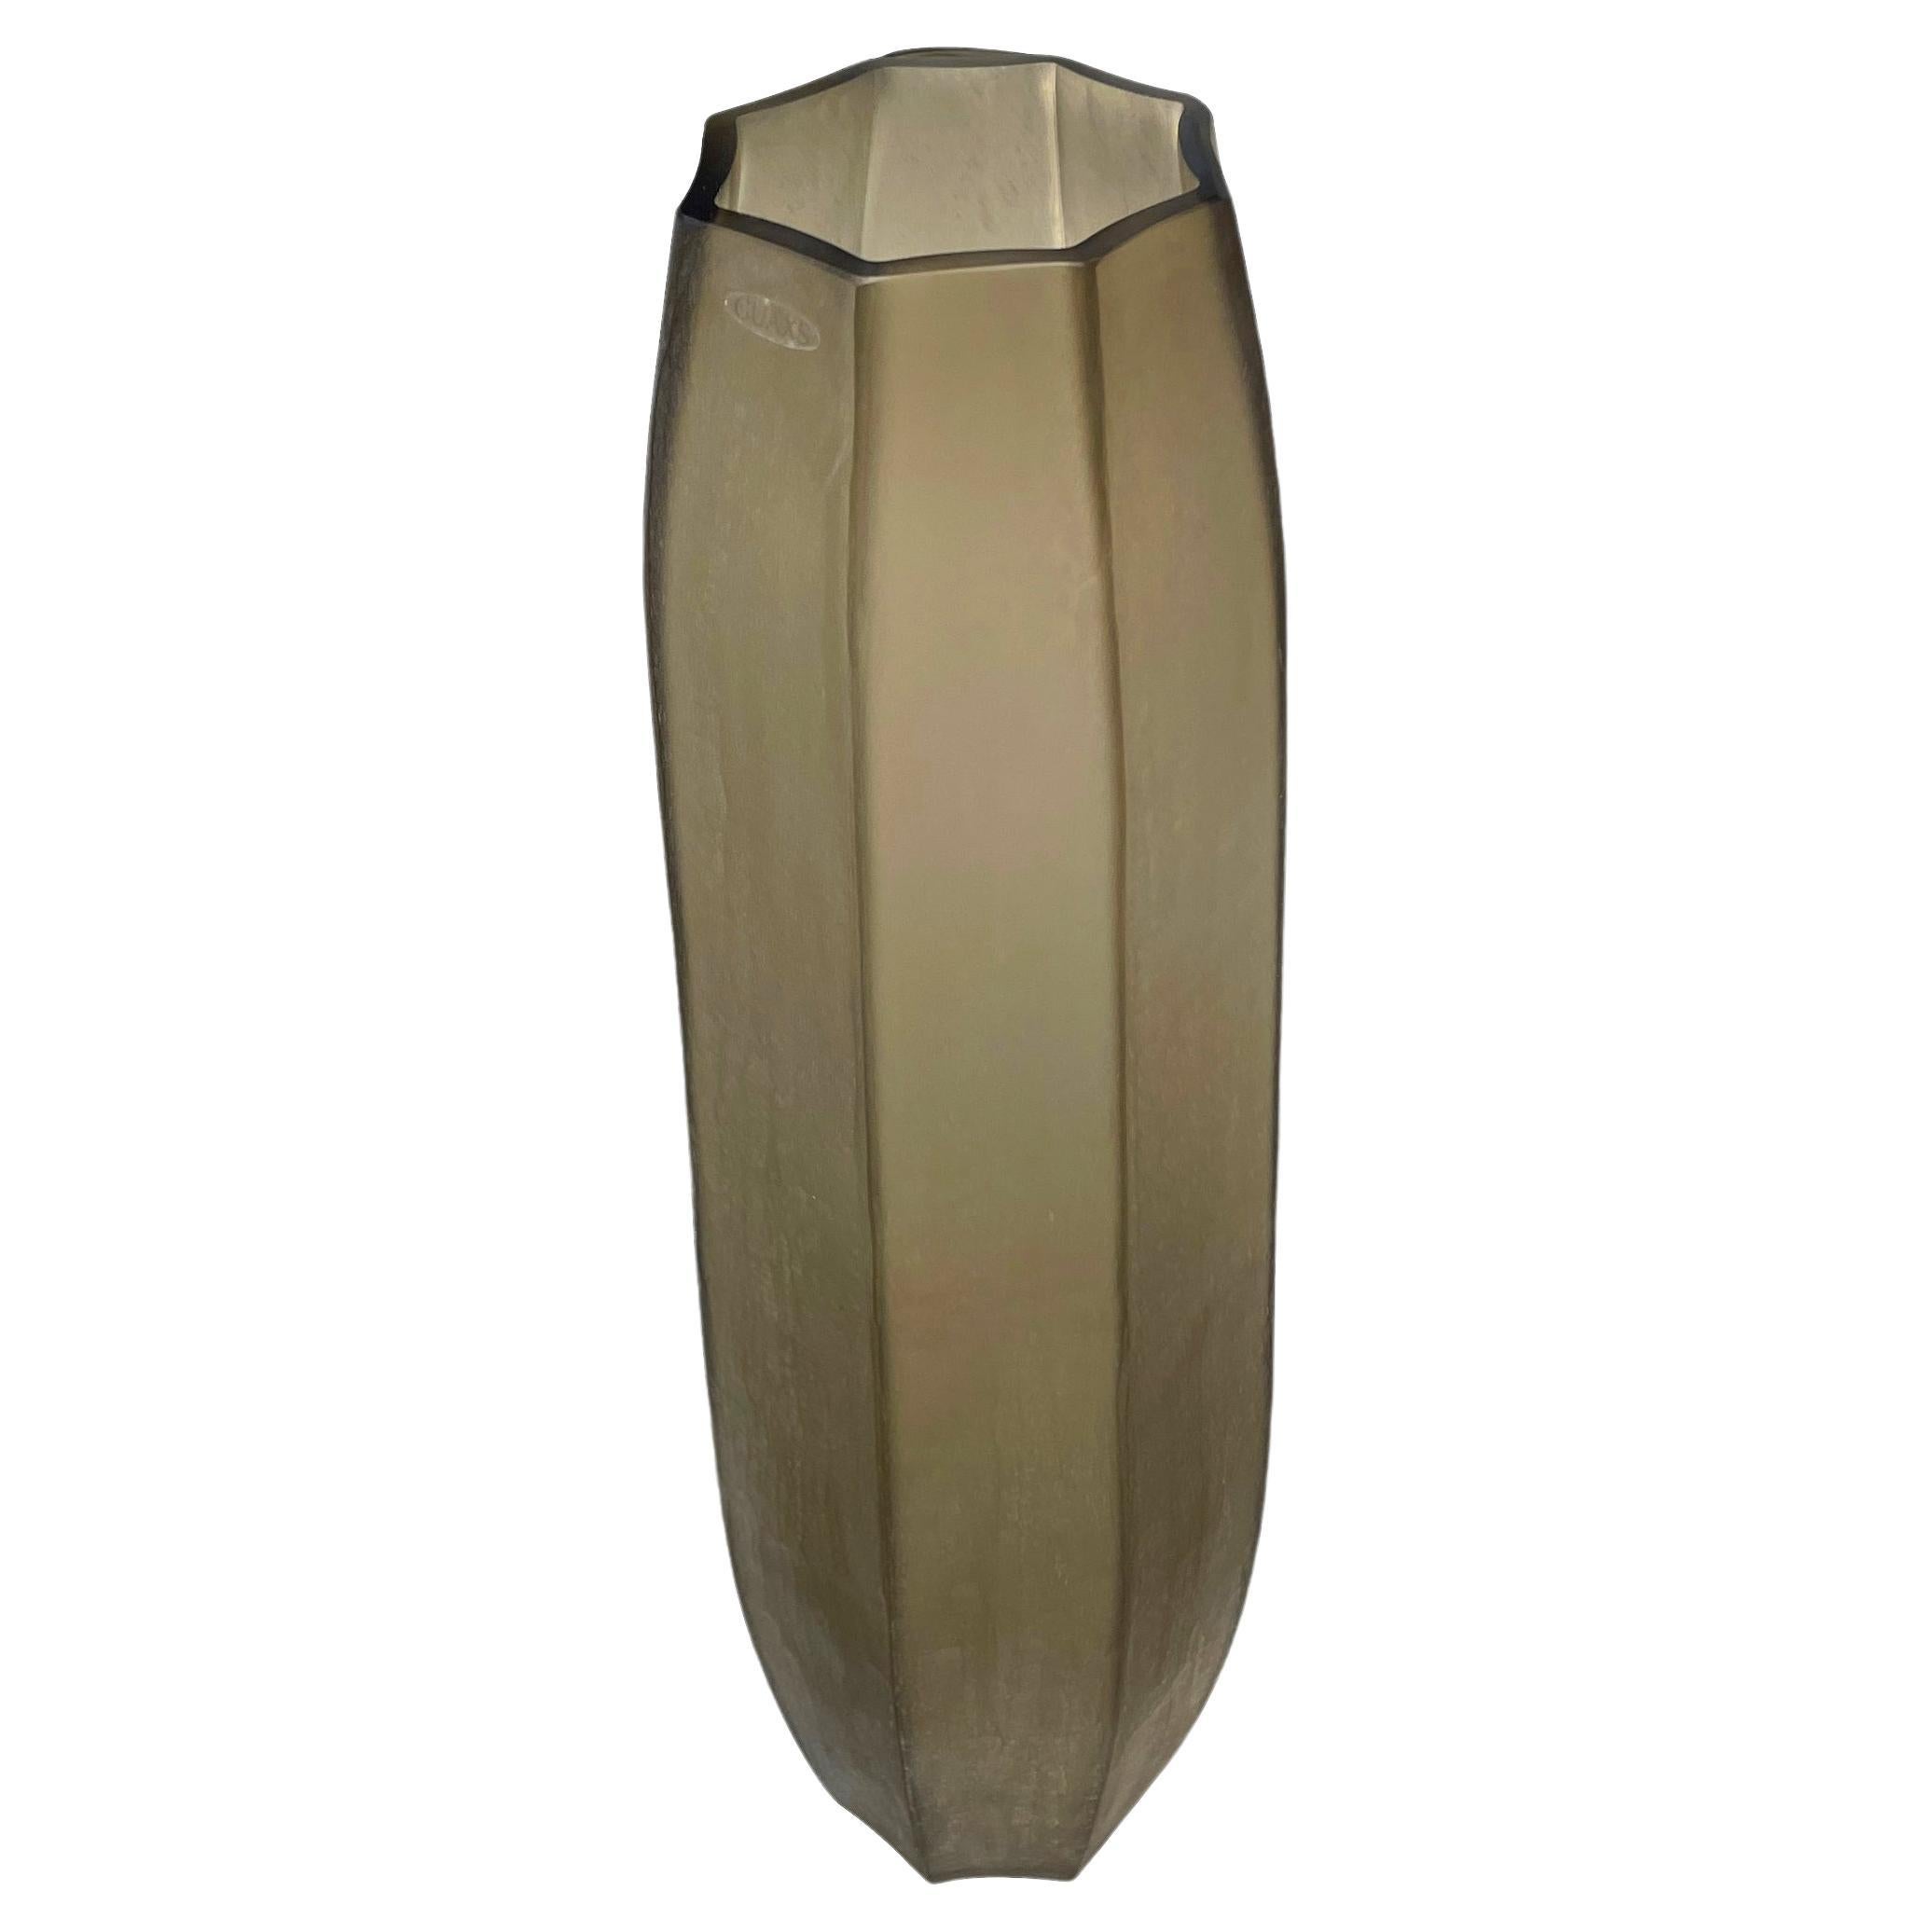 Contemporary Romanian tall octagonal shaped frosted tan color vase.
Can hold water.
Five tan glass vases in different shapes and sizes.